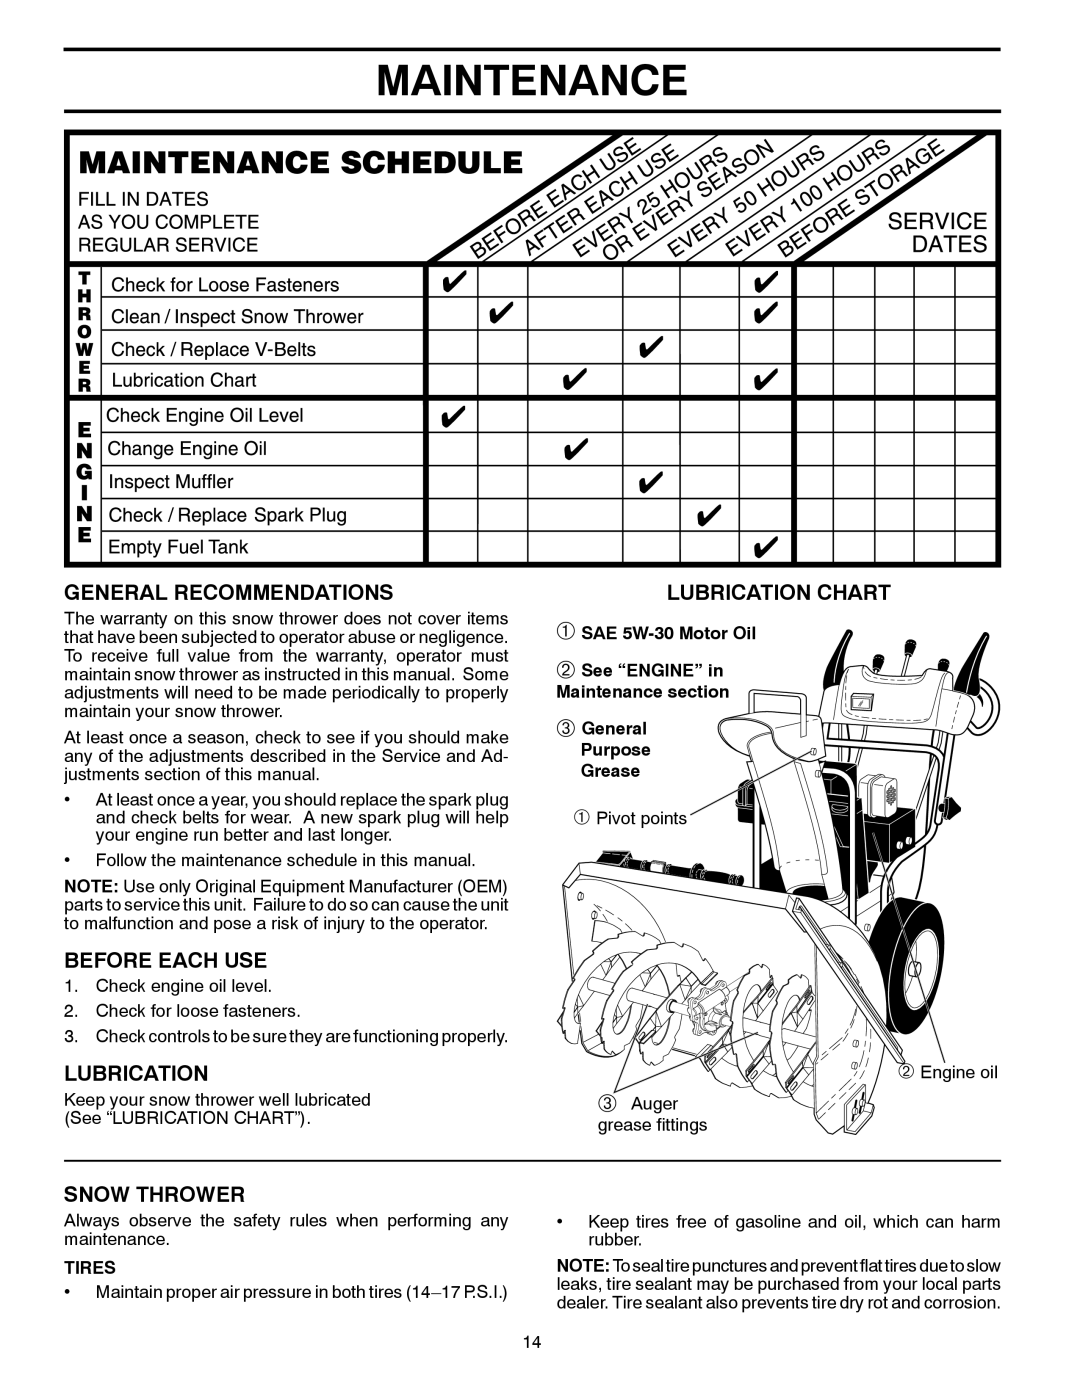 Poulan 429896 Maintenance, General Recommendations, Before Each Use, Snow Thrower, Lubrication Chart, Purpose Grease 